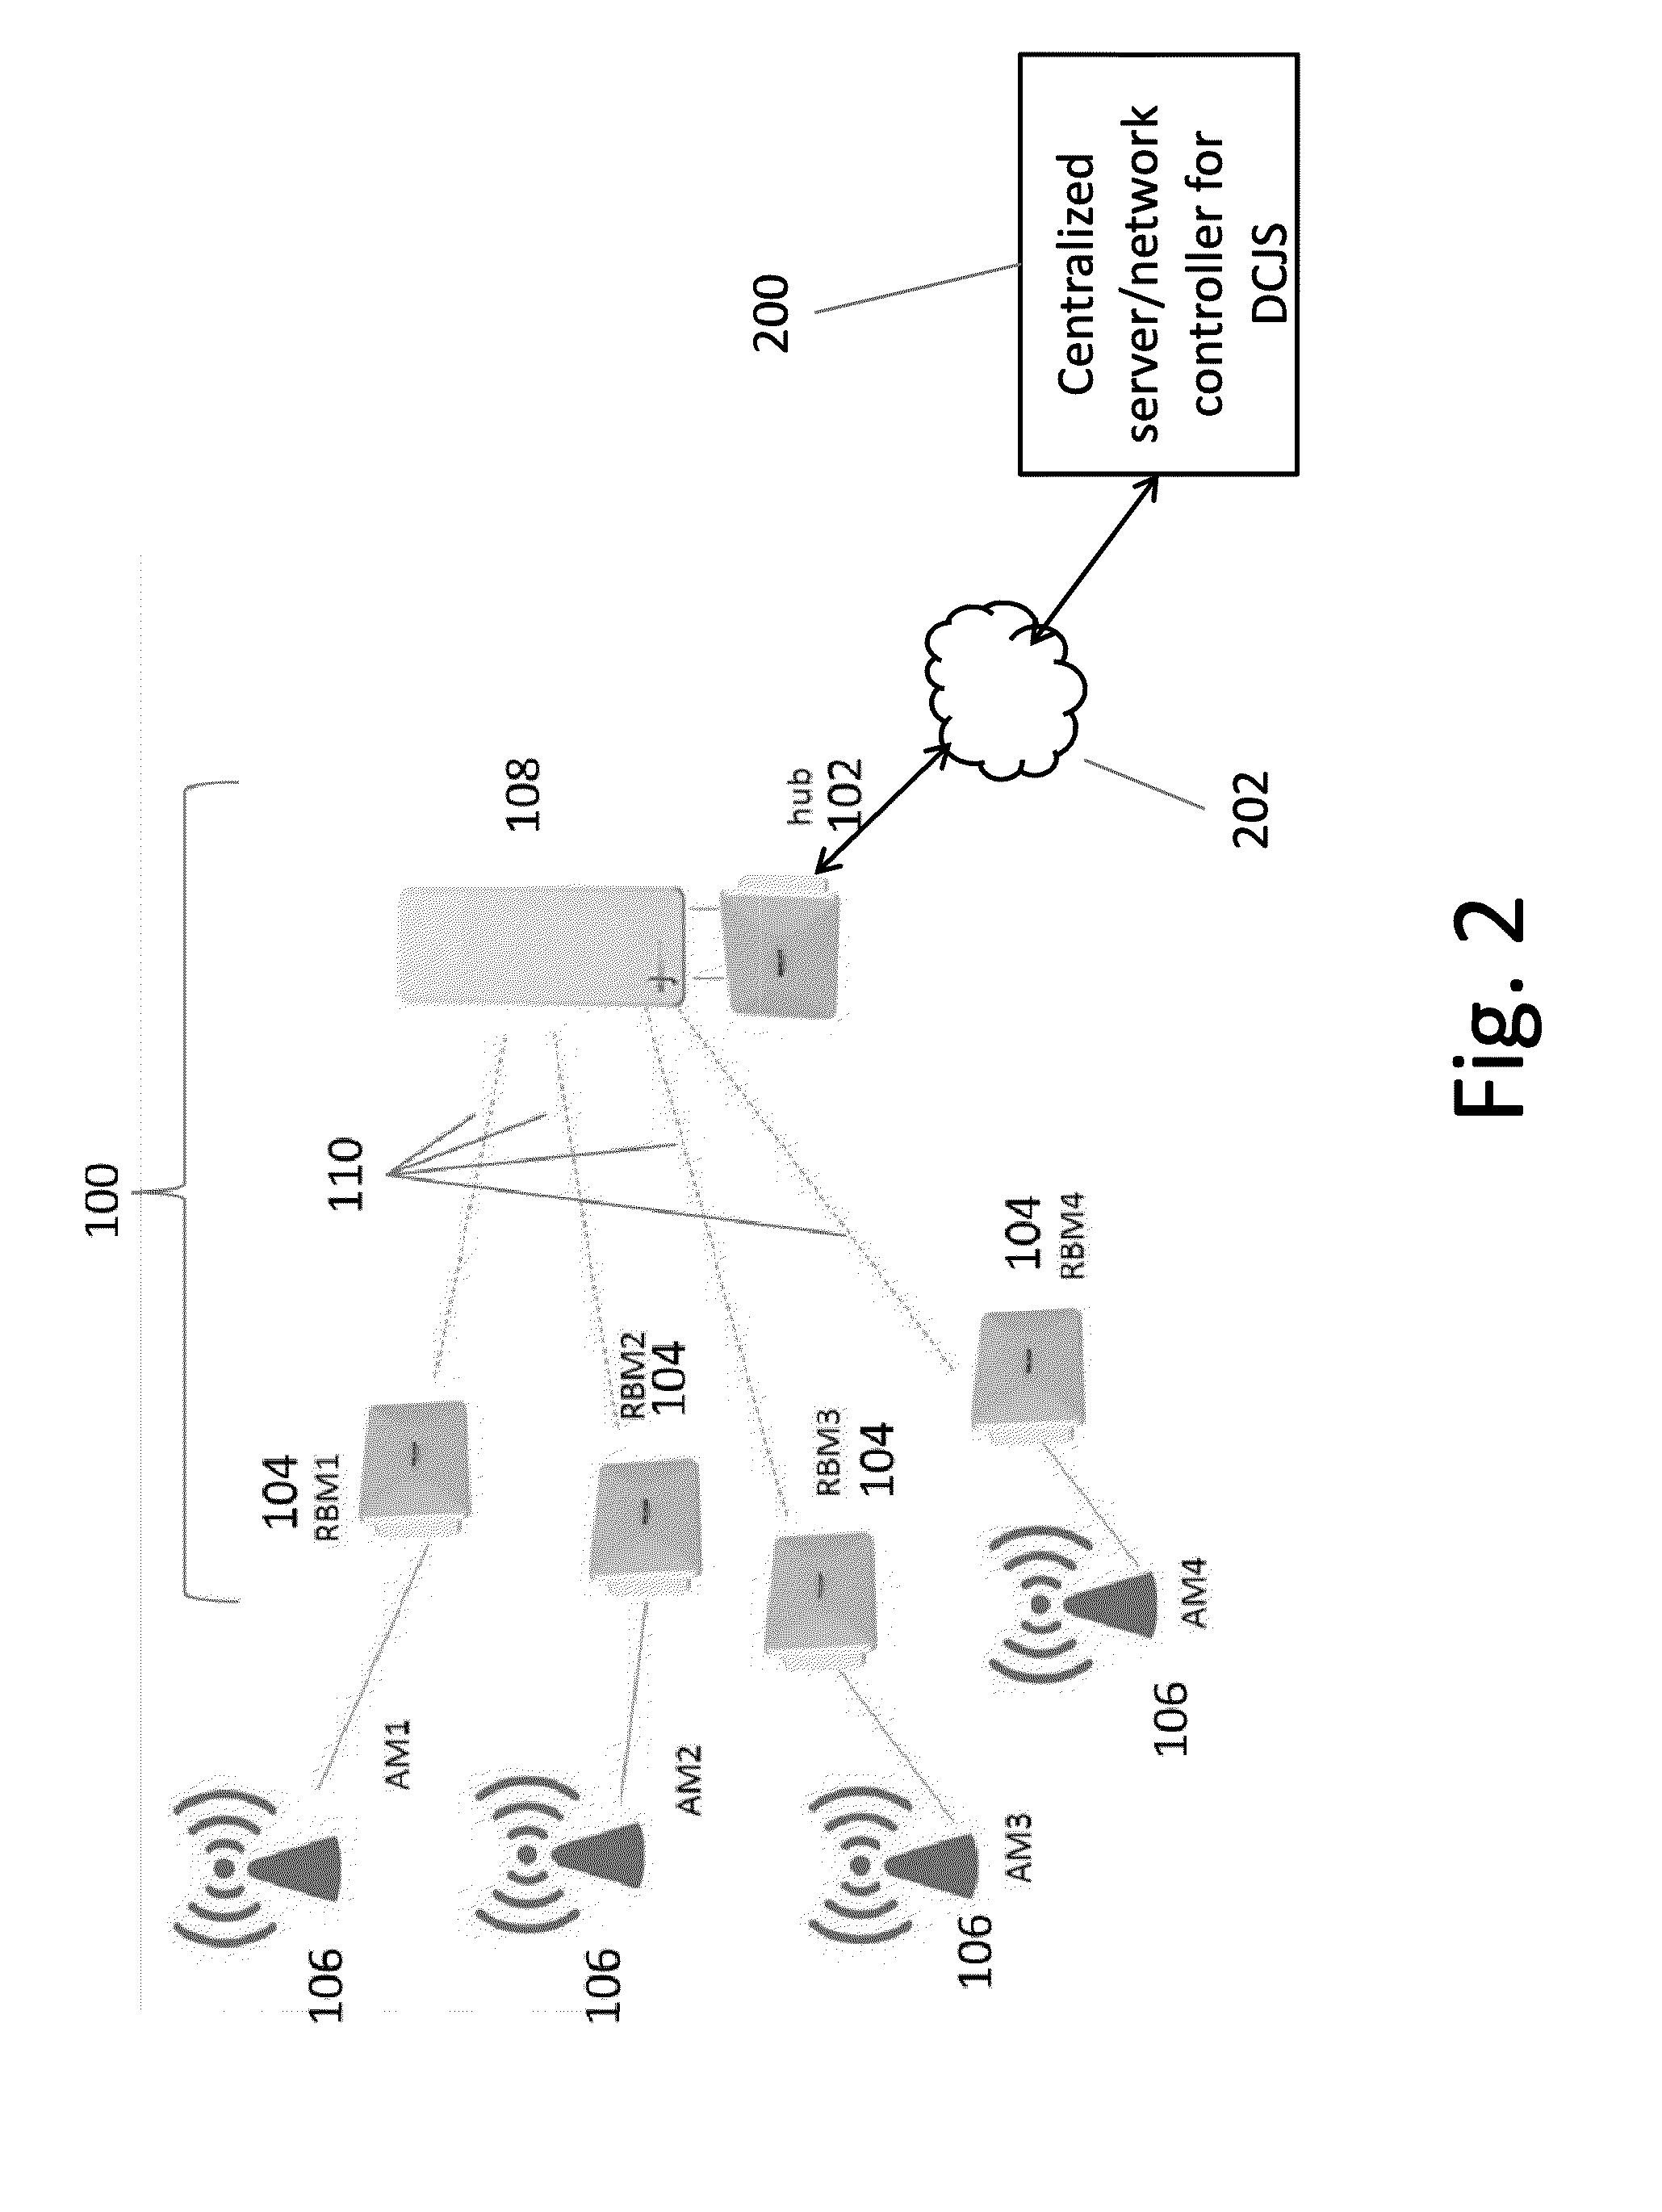 System and method for reception mode switching in dual-carrier wireless backhaul networks